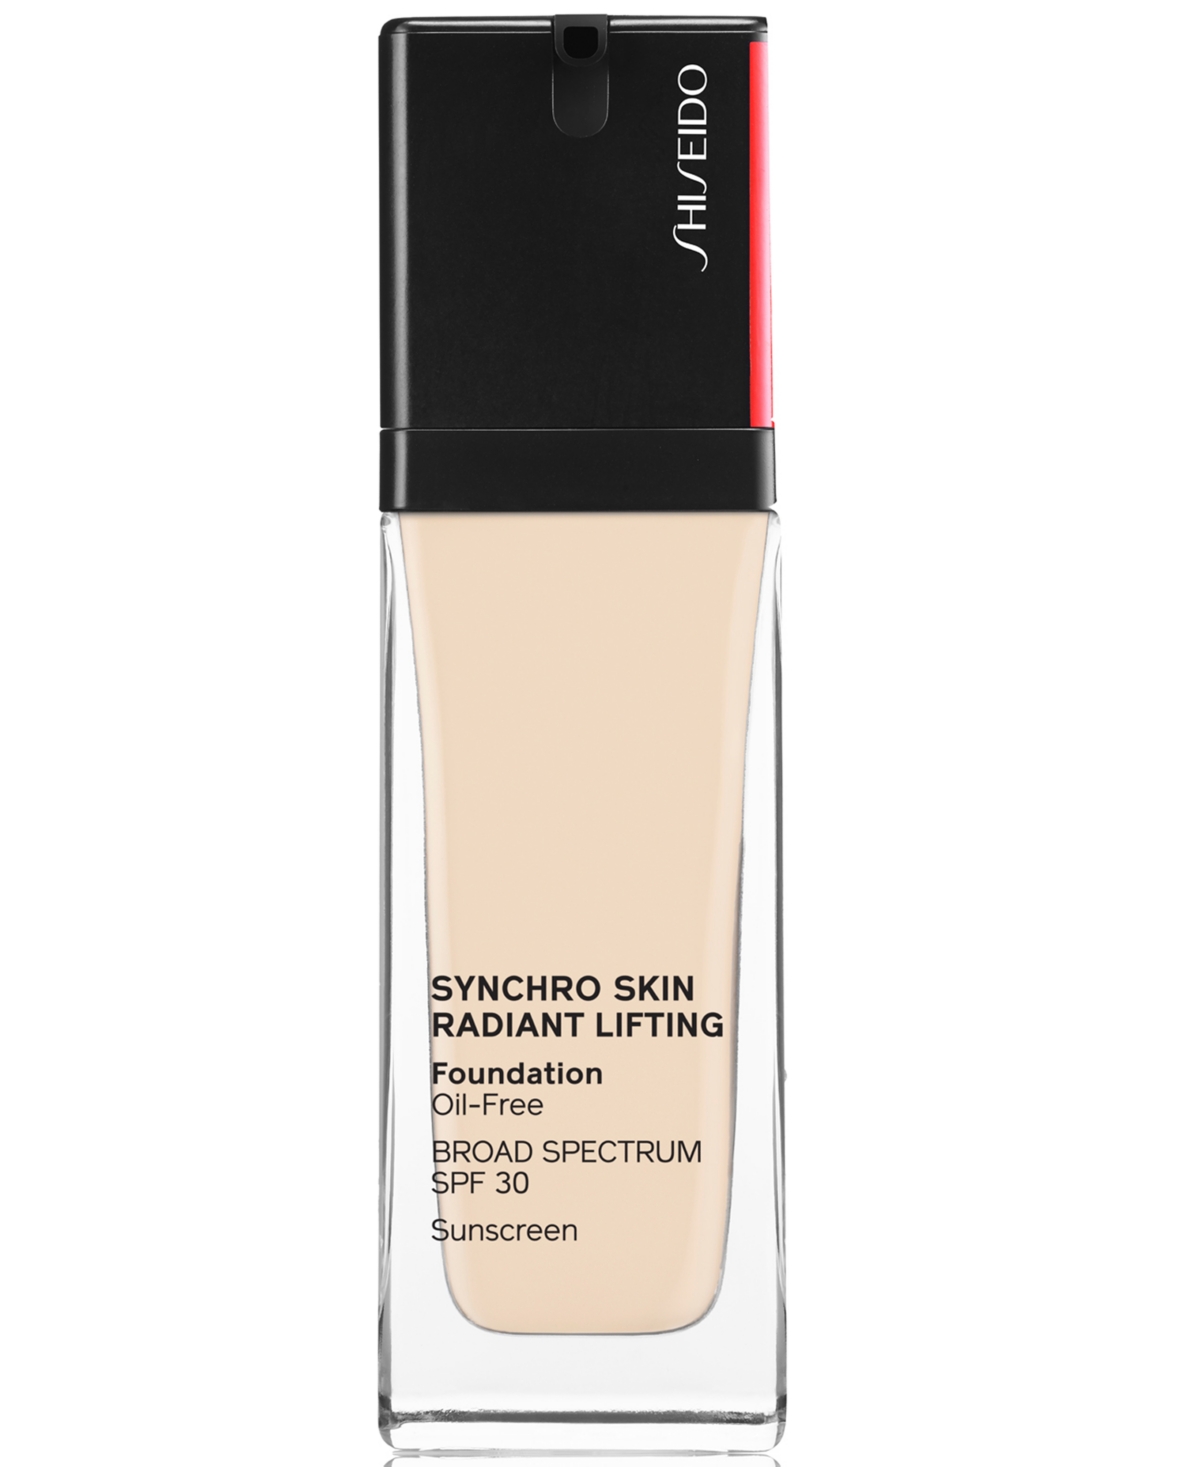 Shiseido Synchro Skin Radiant Lifting Foundation, 30 ml In Ivory,golden Tone For Fairest Skin With